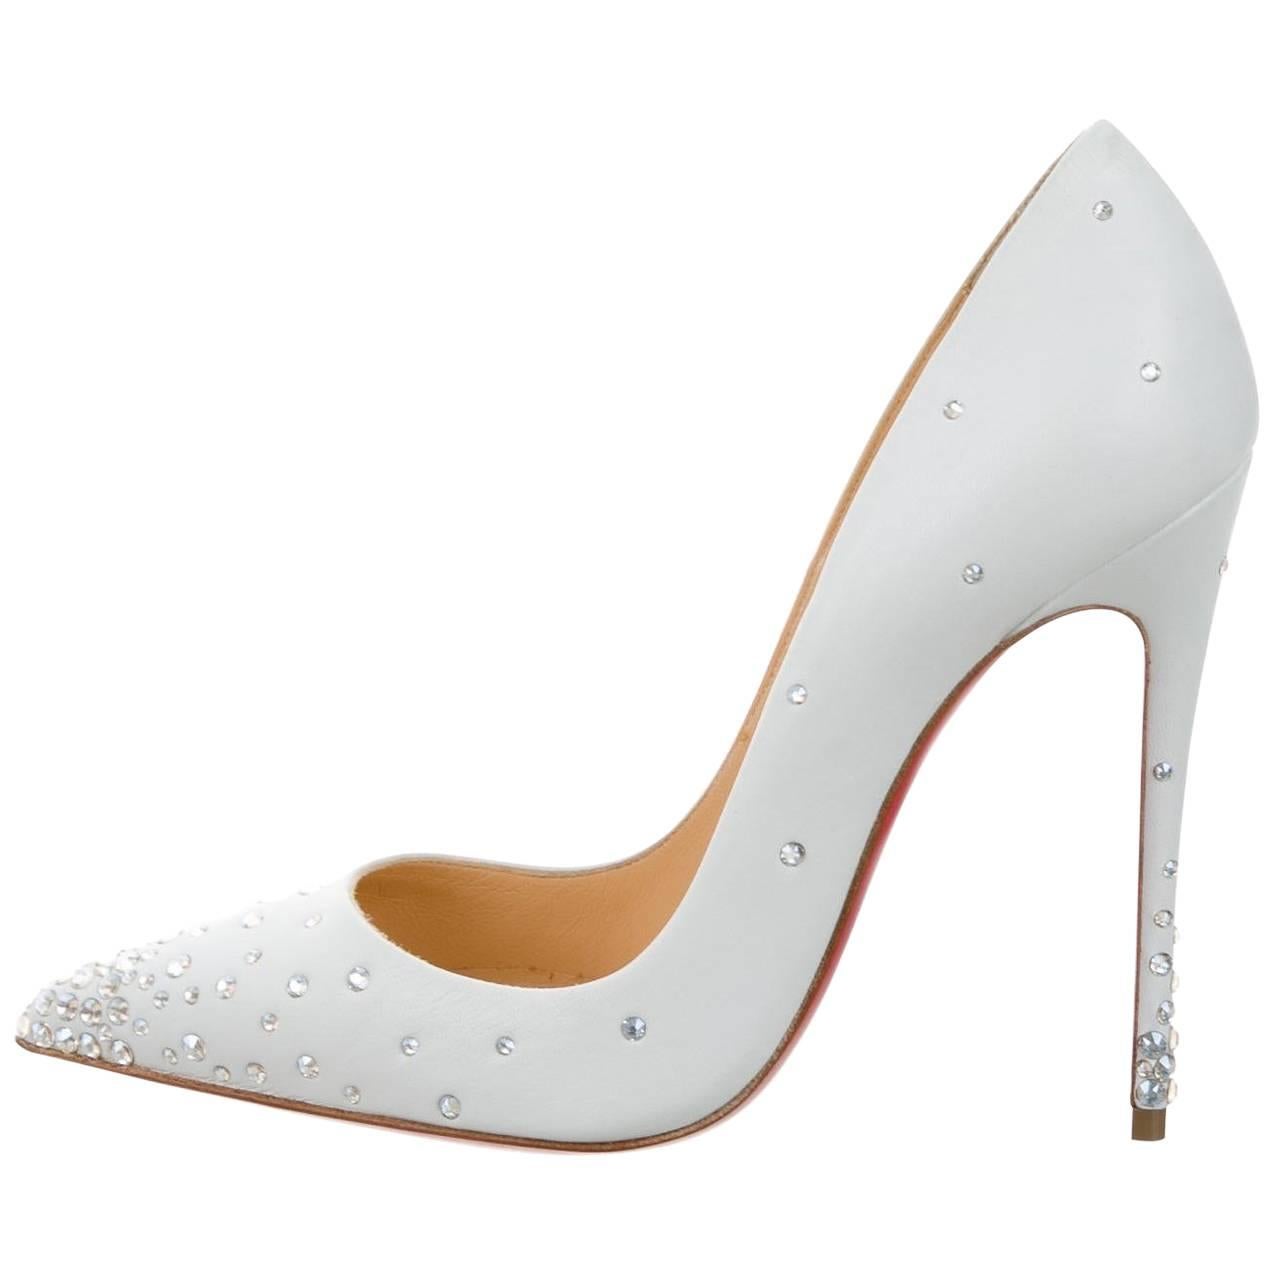 Christian Louboutin New Sold Out White Leather Crystal So Kate Heels Pumps W/Box